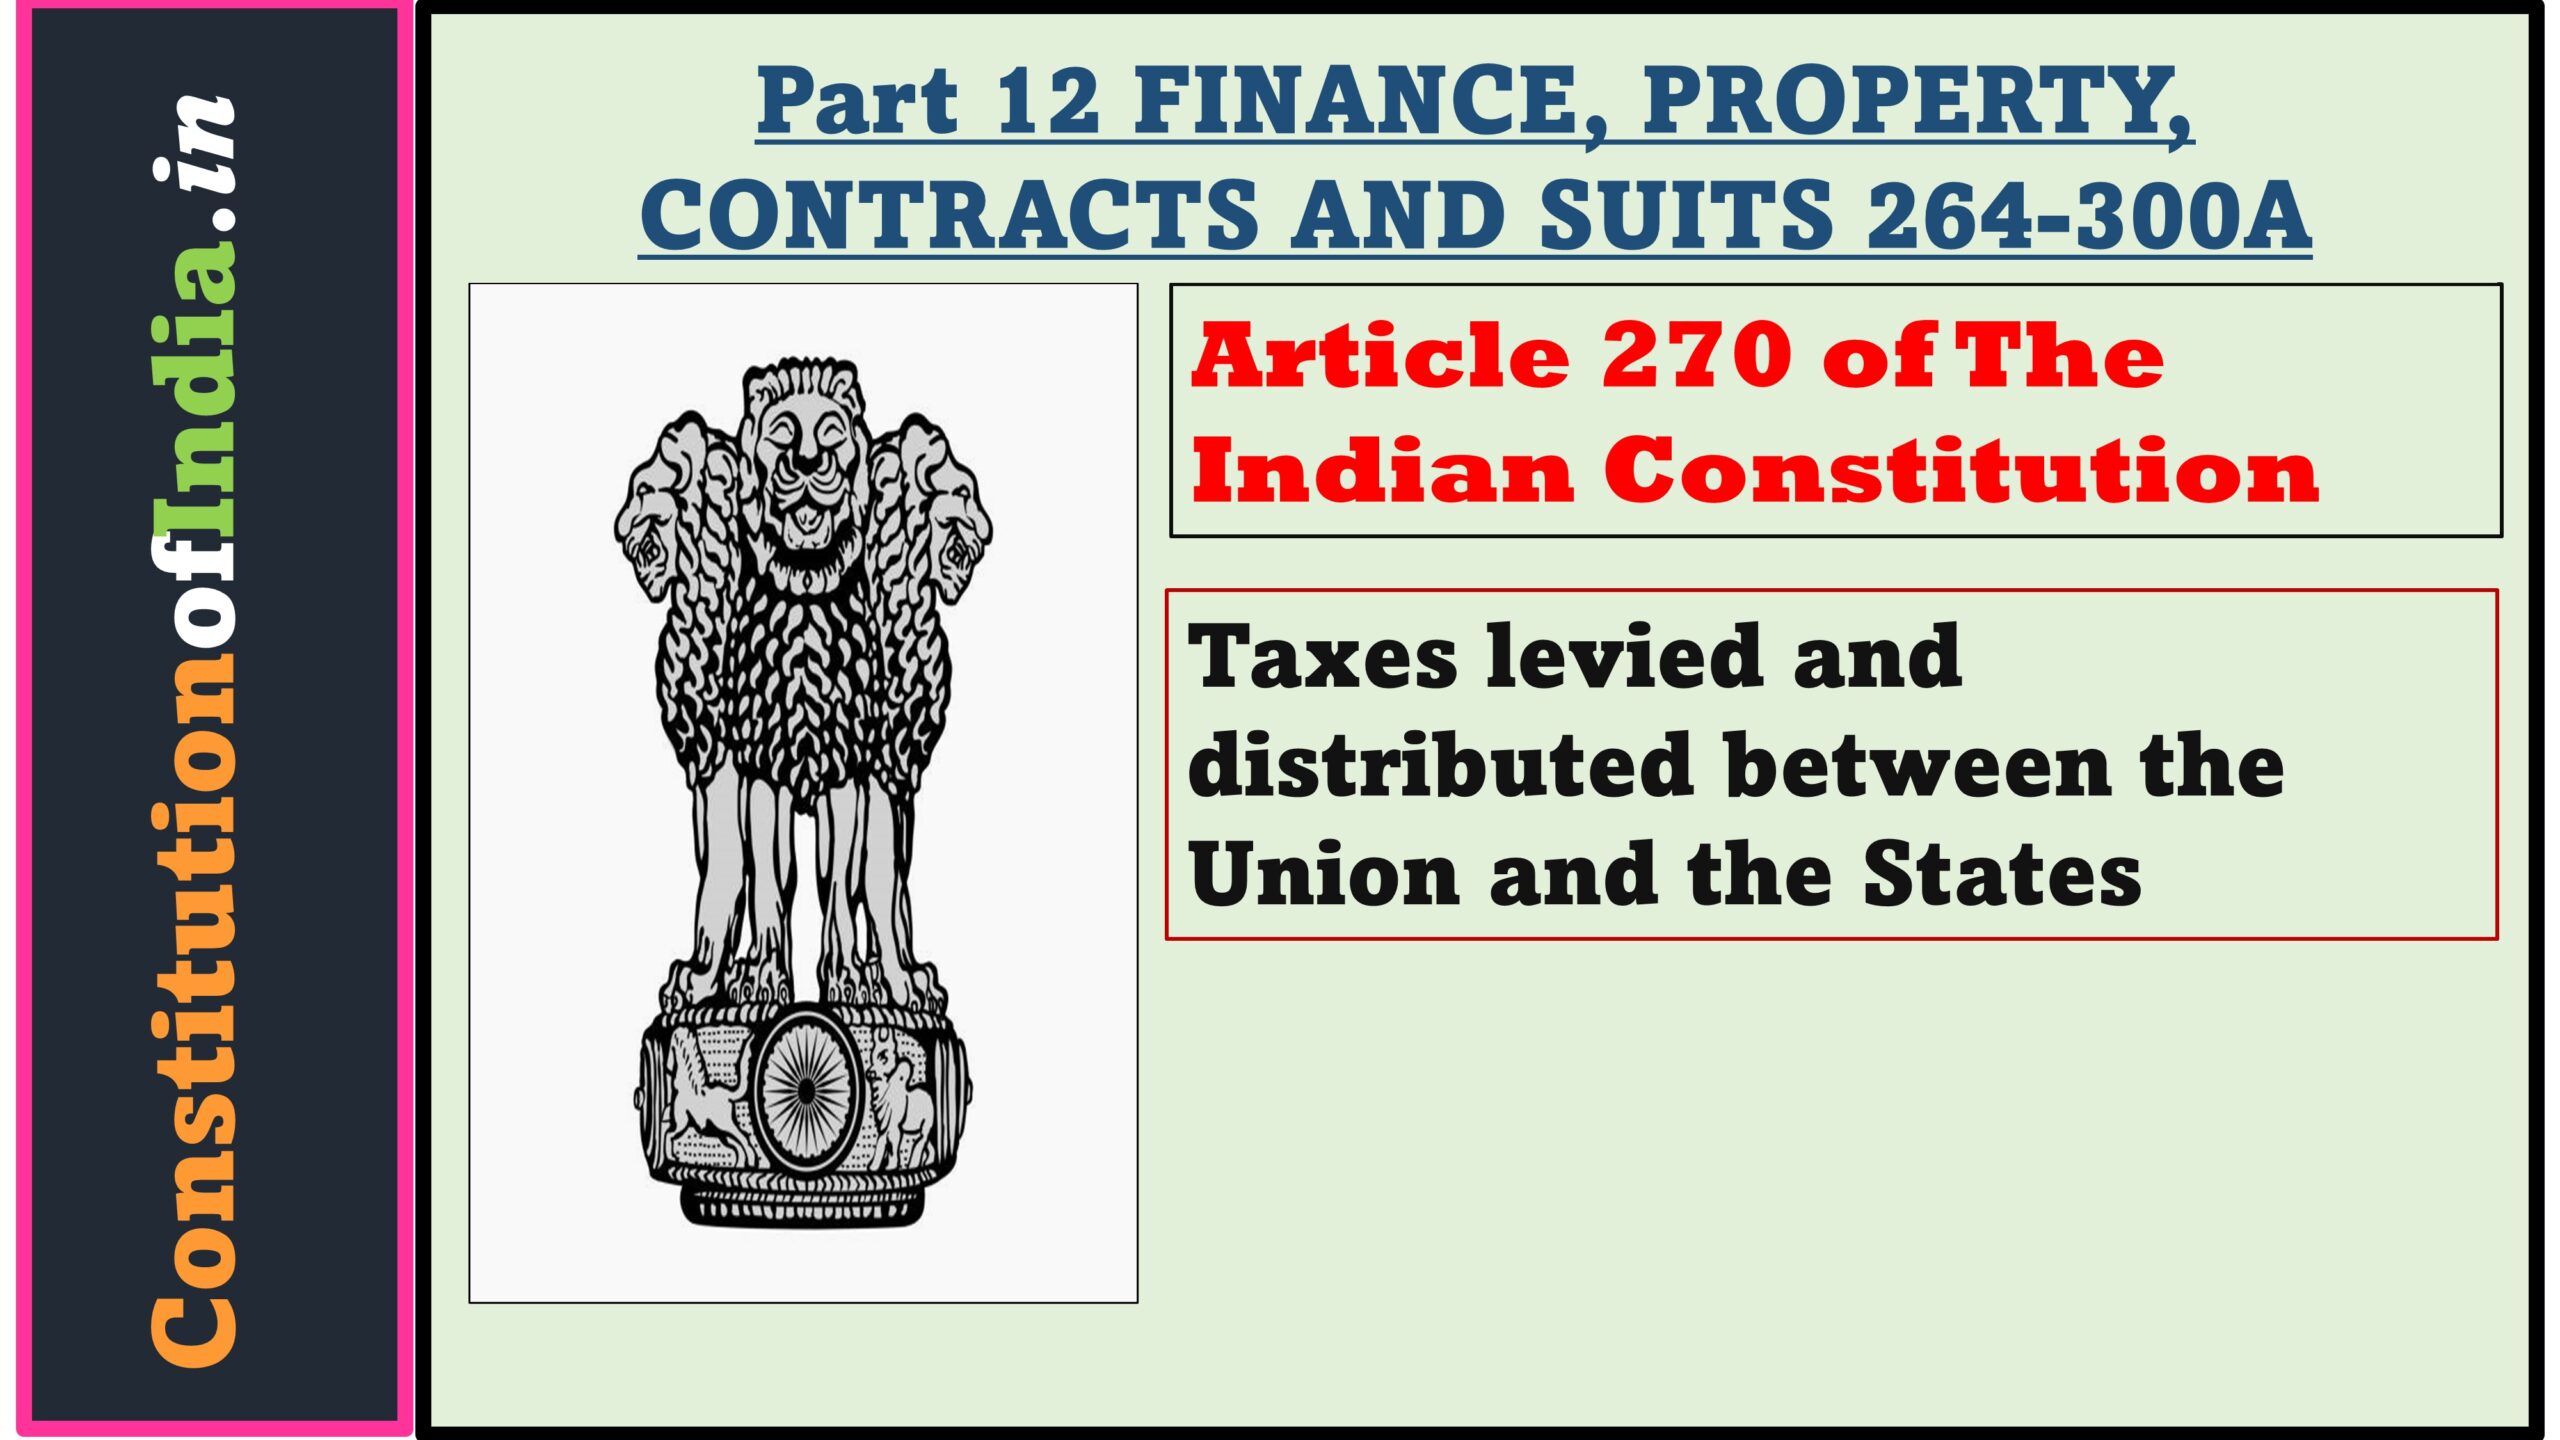 Article 270 of The Indian Constitution